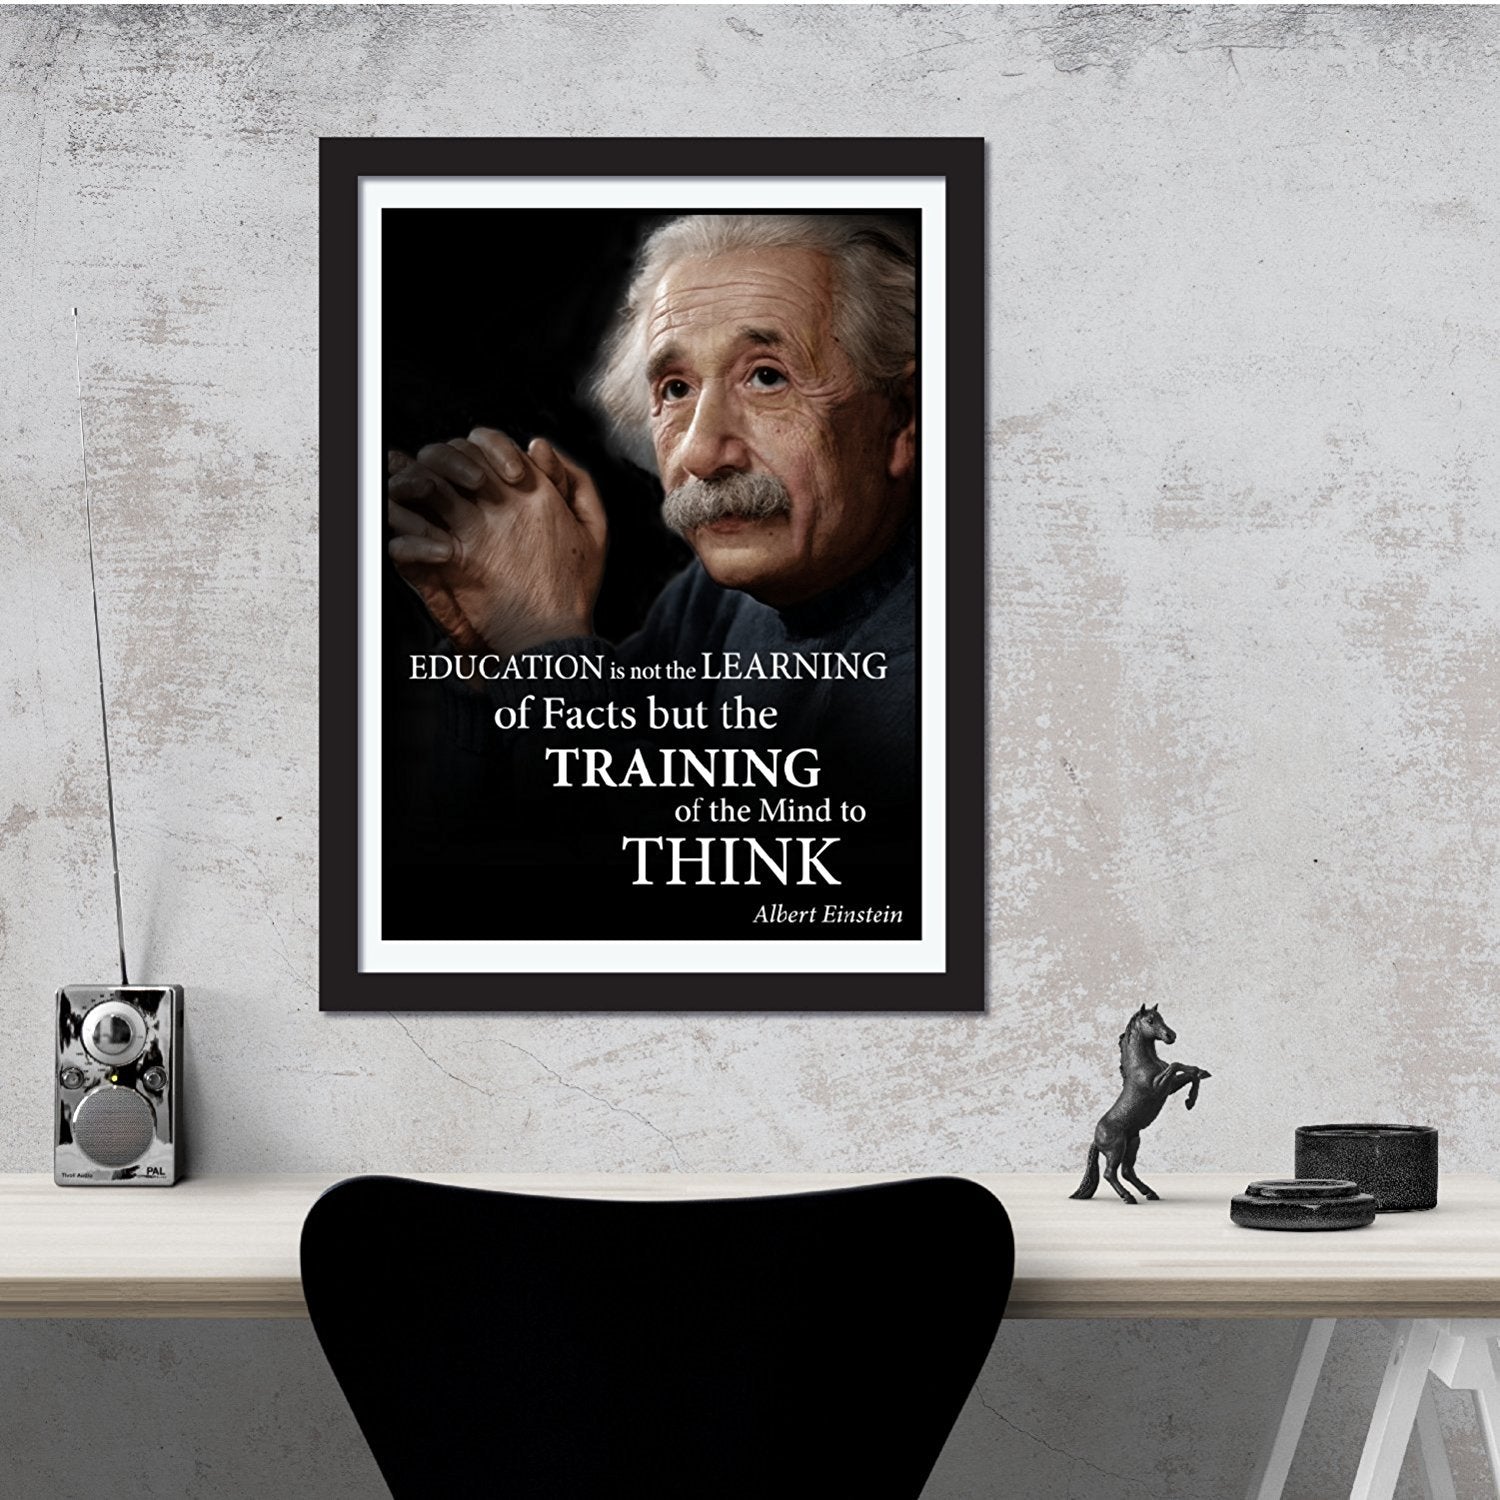 Albert Einstein education portrait poster quote print wall art - Young N' Refined